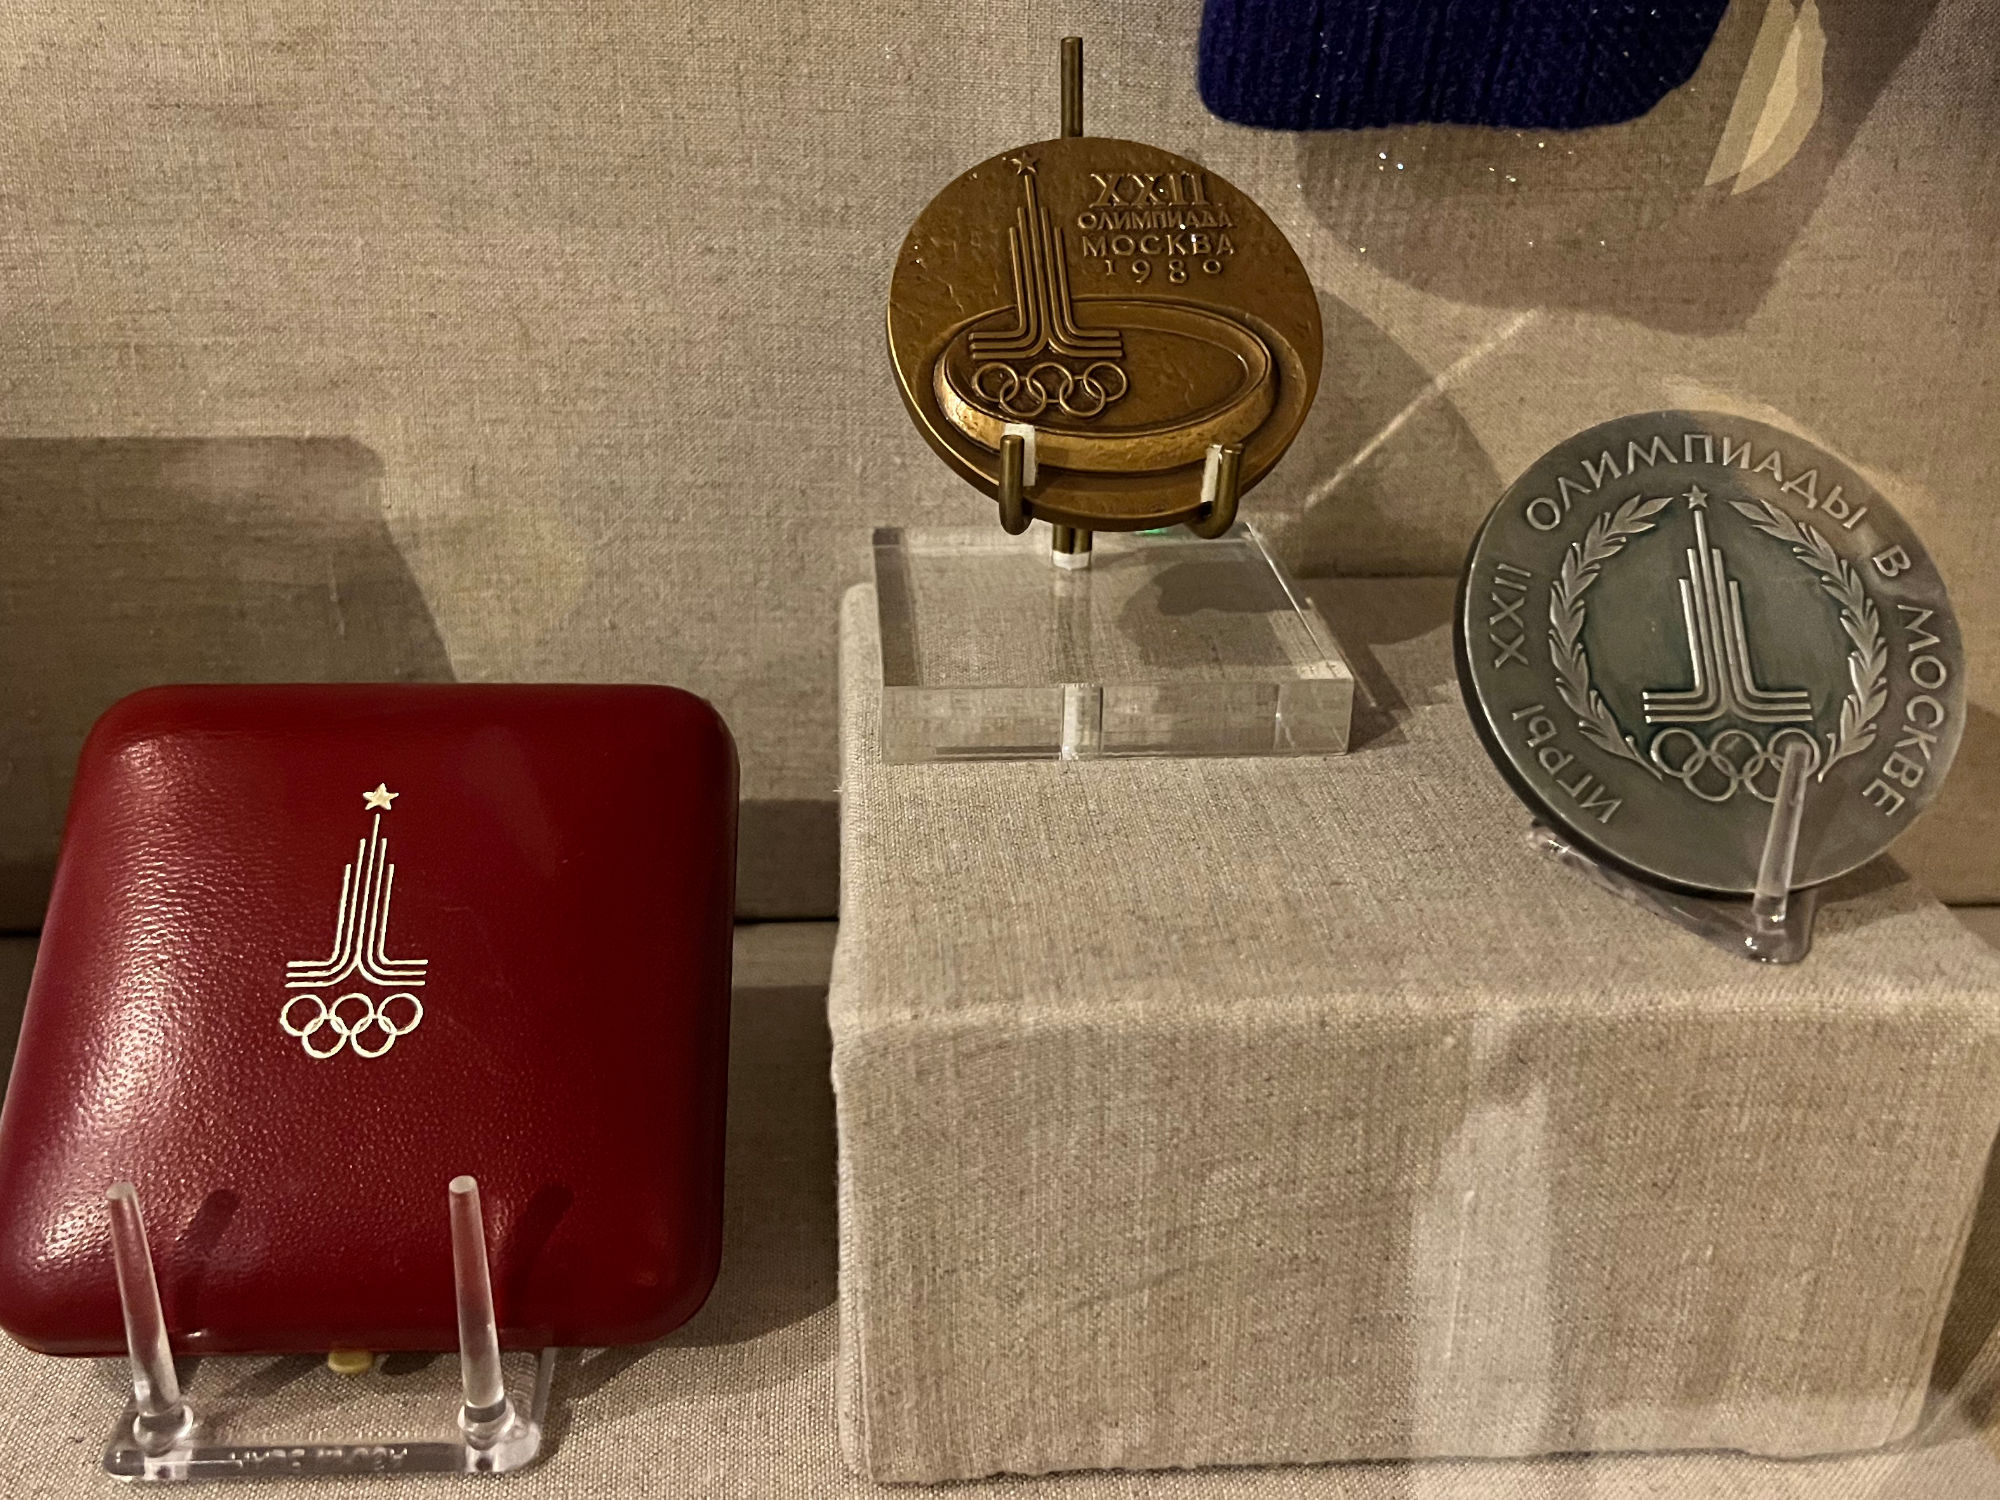 1980 Olympic Games Medals